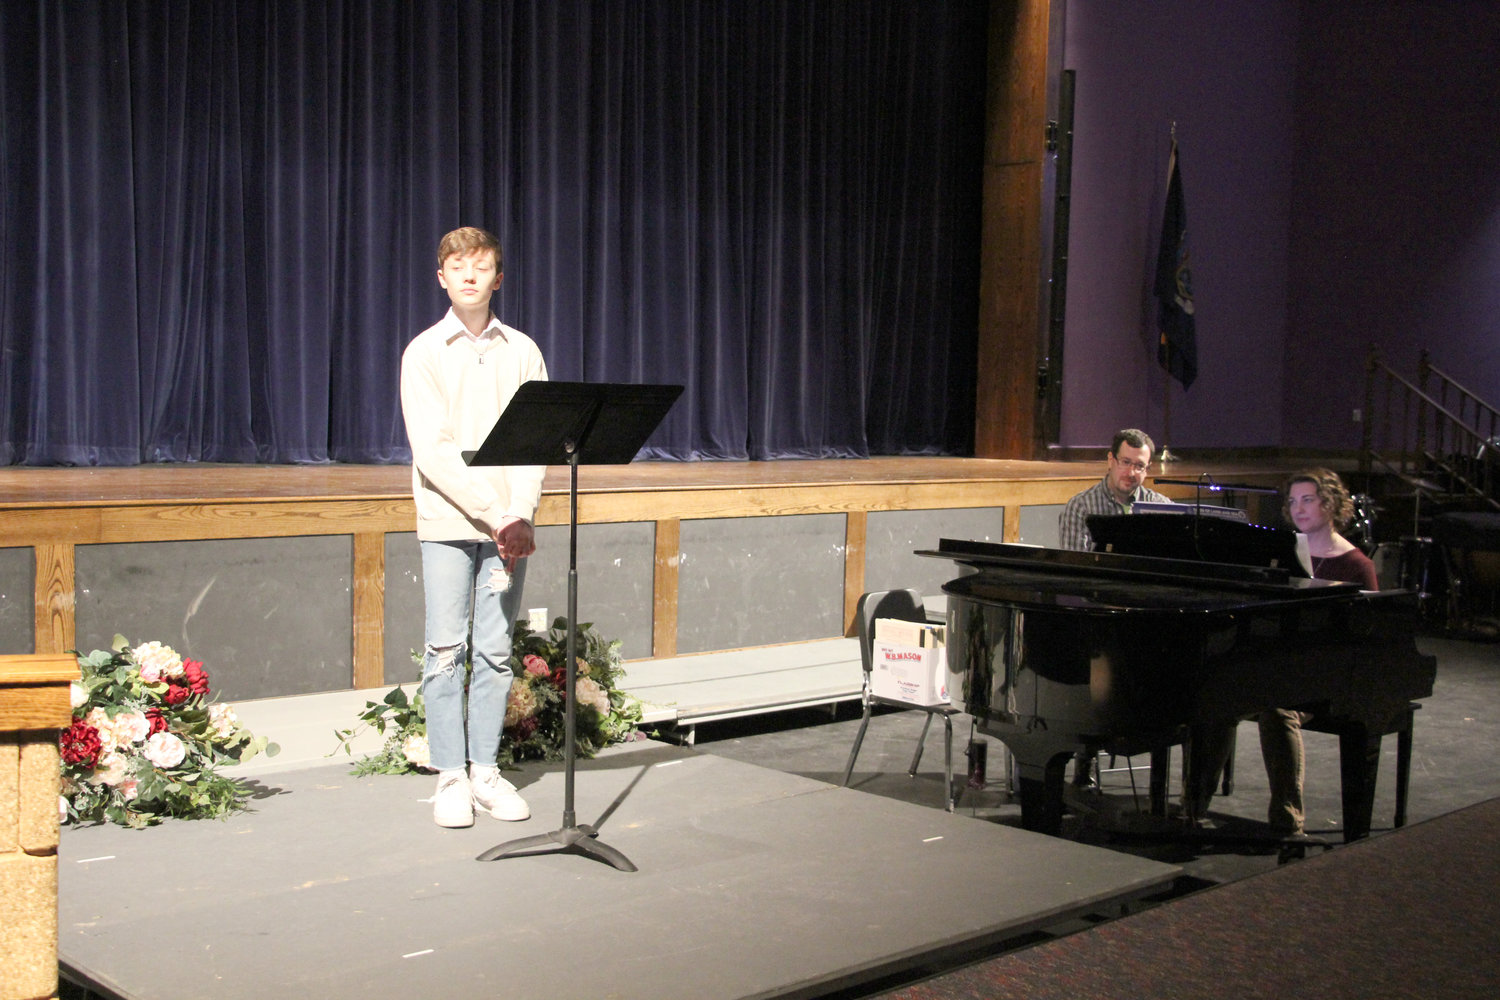 Logan Weyant sang “Break, O Sea.” At right, Keira Sullivan Weyant accompanies her son on piano. Music teacher Kevin Giroux is pictured also.